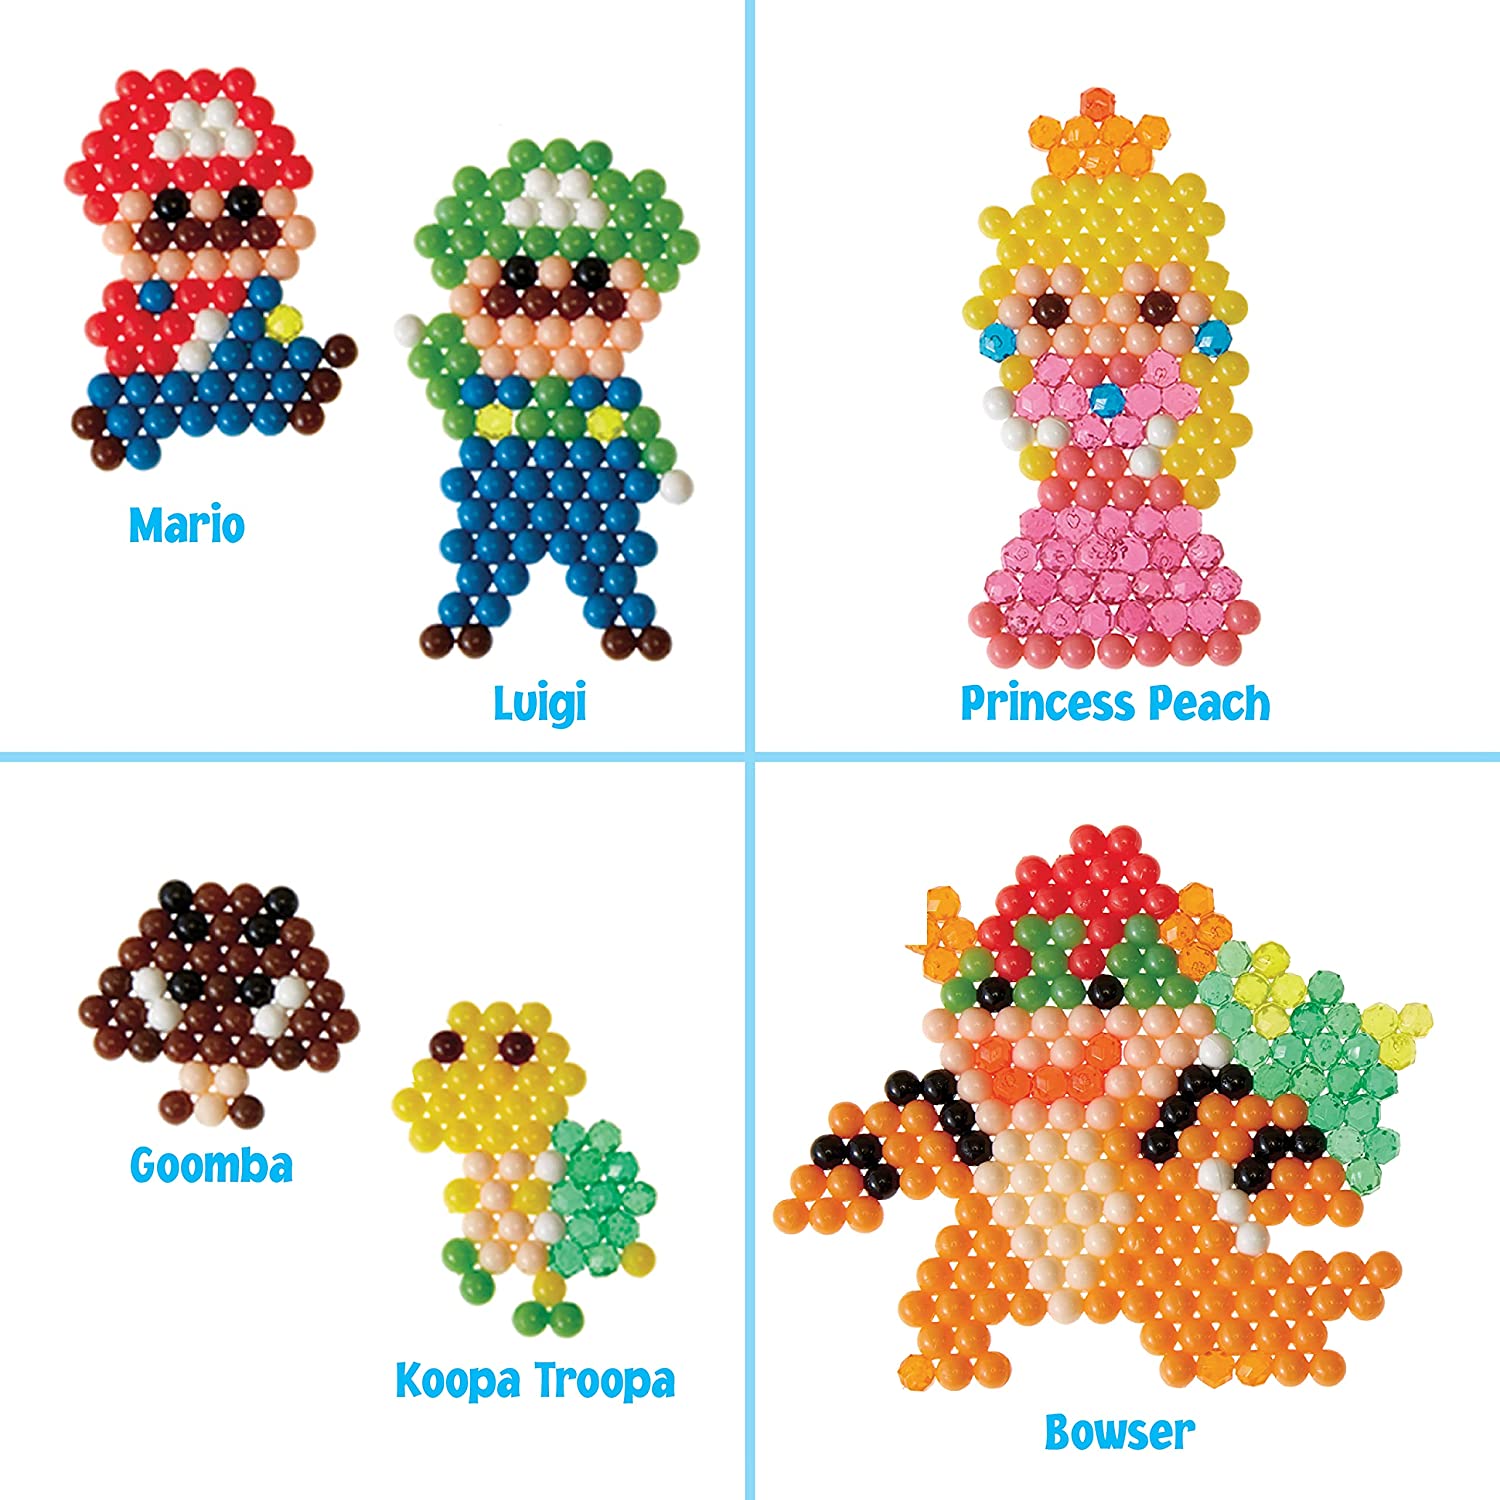 Supermario Character Set - Aquabeads – The Red Balloon Toy Store